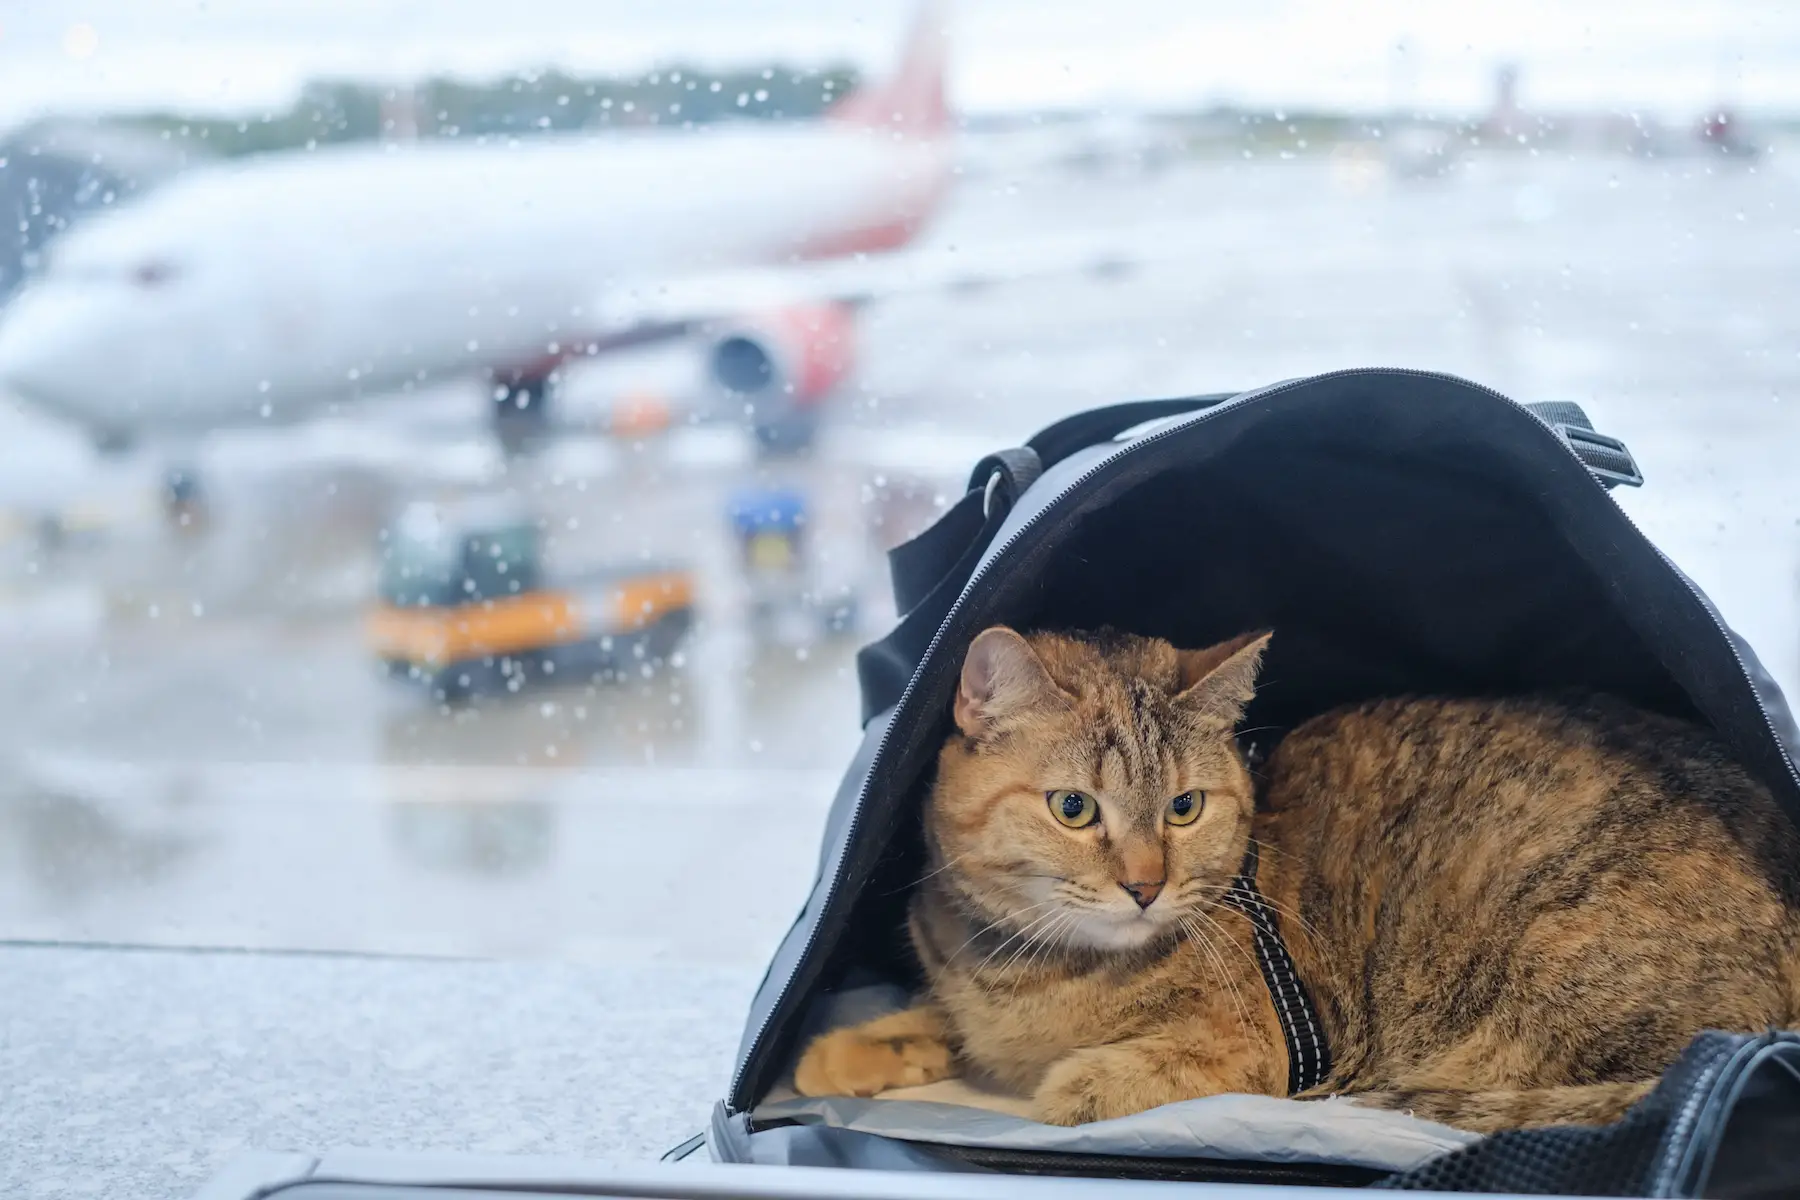 A tabby cat lays in an open carrier bag on the windowsill of an airport with a plane in the background